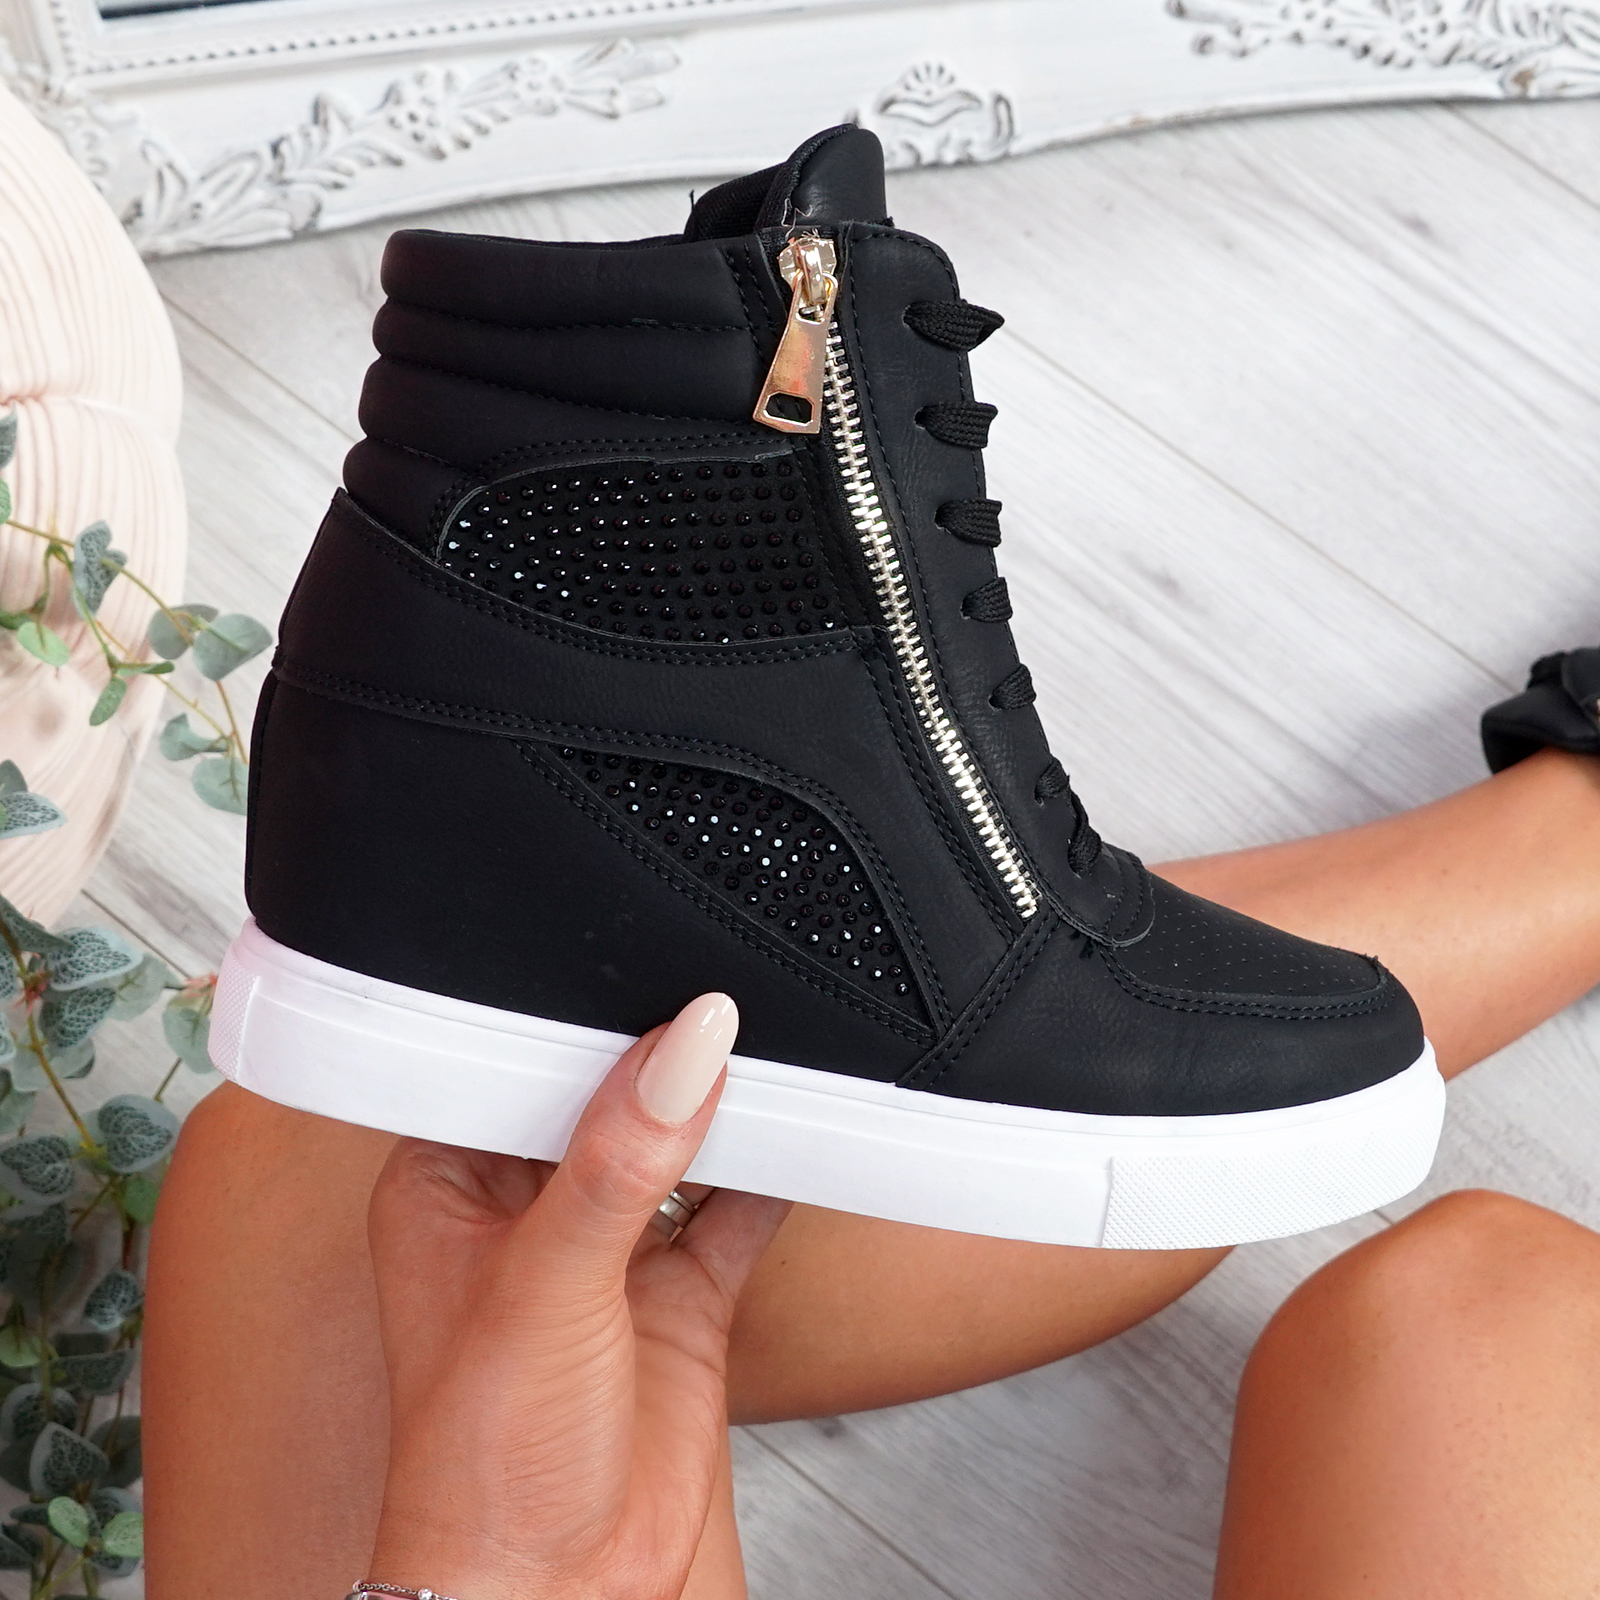 Womens Ladies Wedge Heel Platform Lace Up Zip High Top Ankle Stud Trainers Boots 